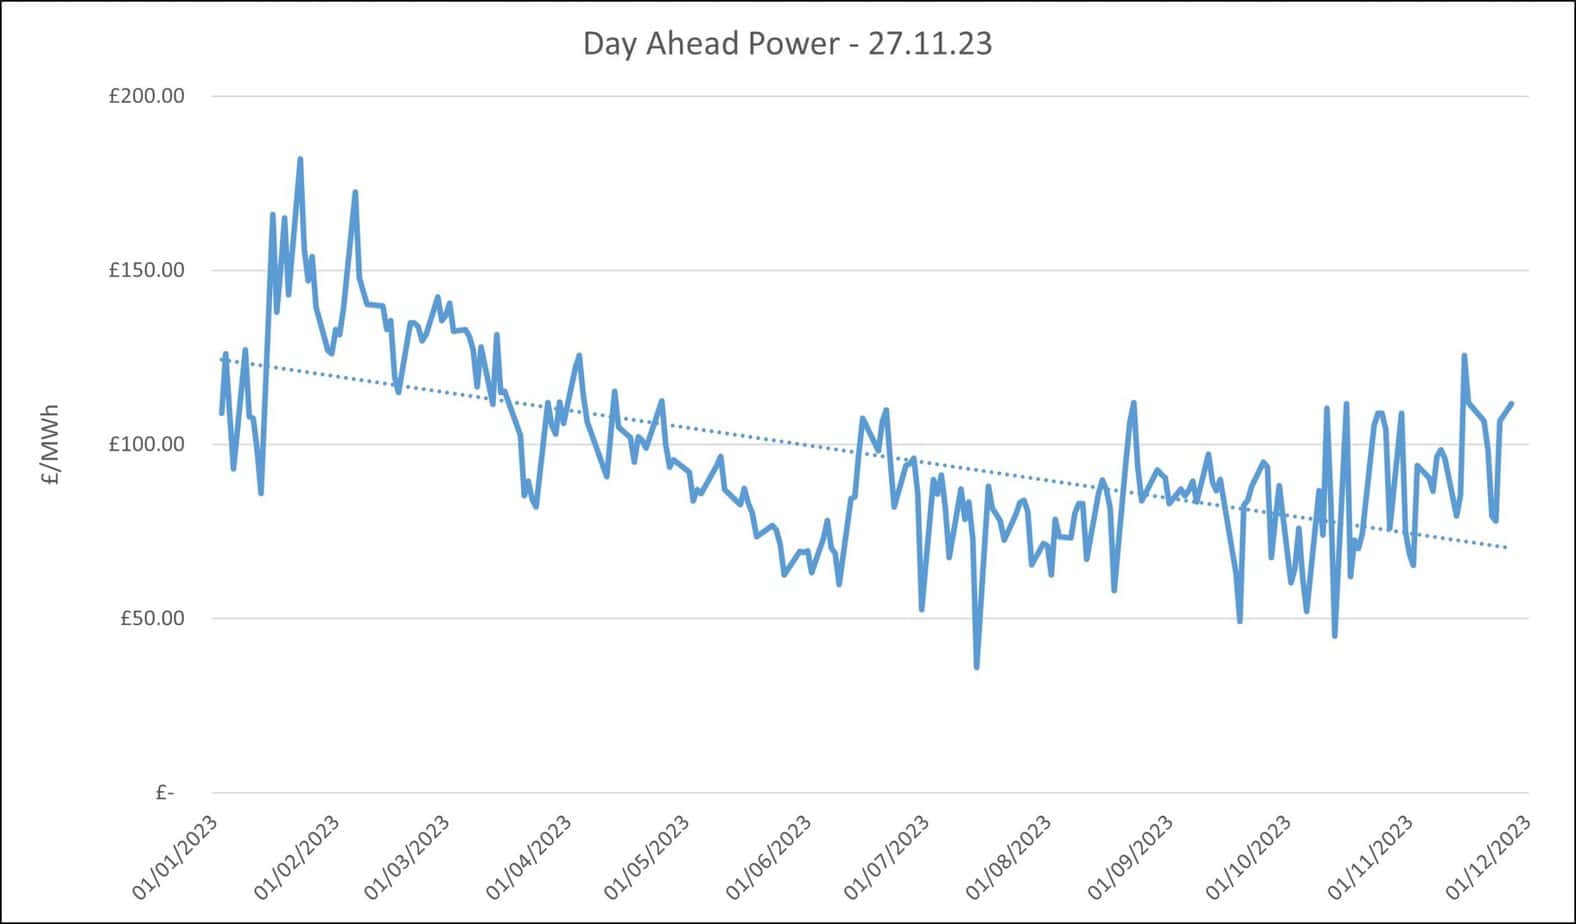 Wholesale electricity price chart day ahead 27.11.23